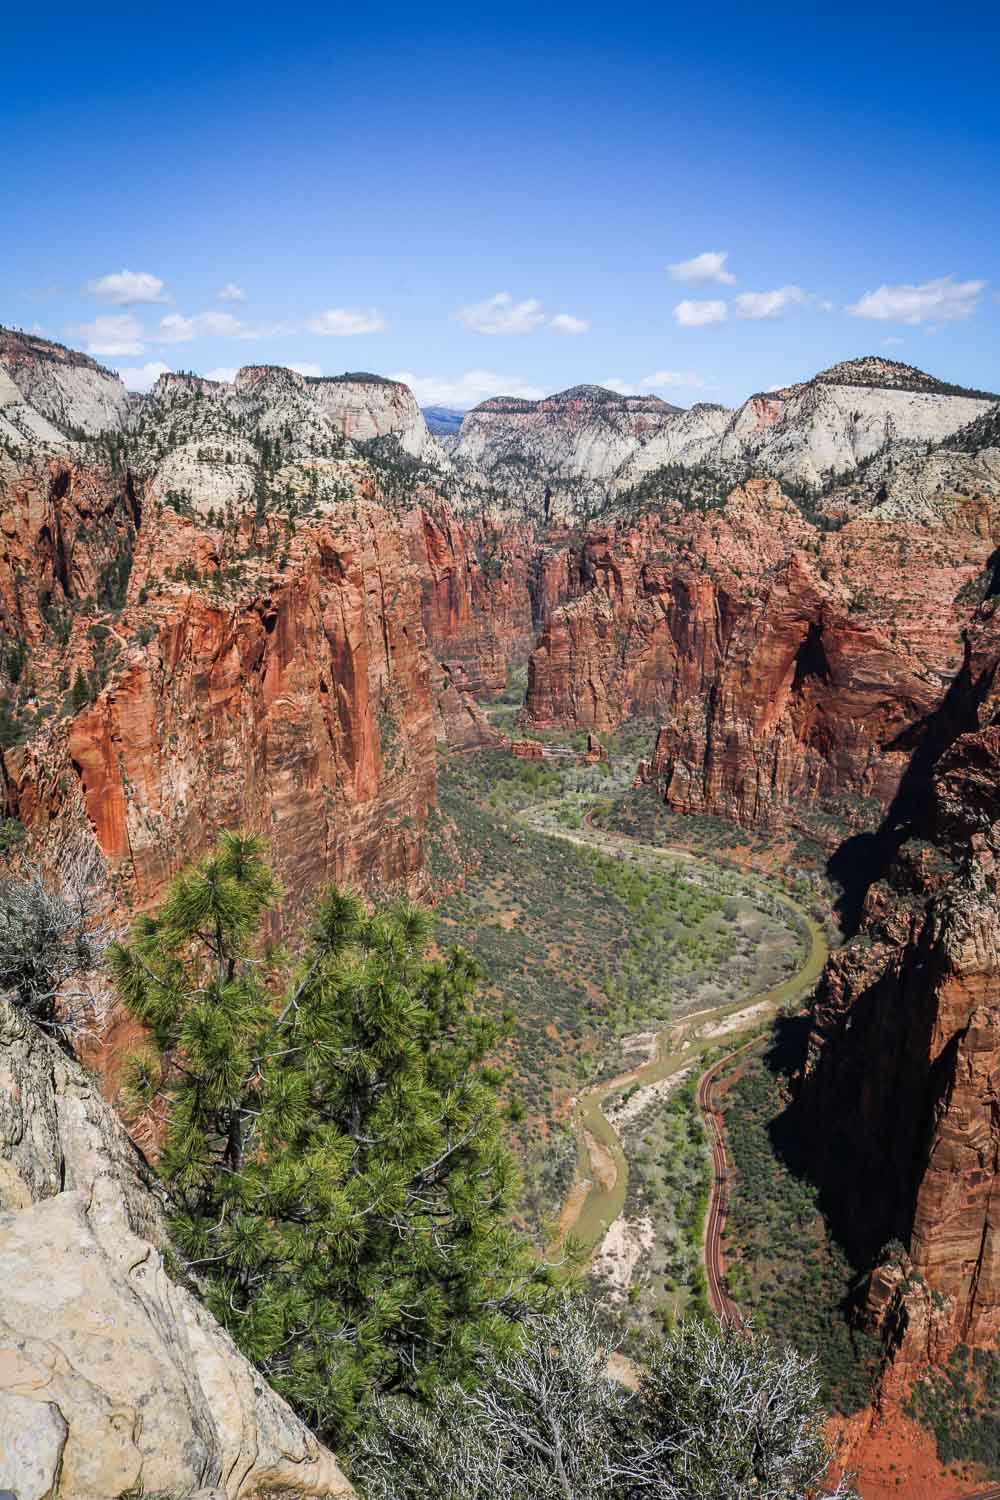 View of Zion Canyon from Angels Landing in Zion National Park, Utah